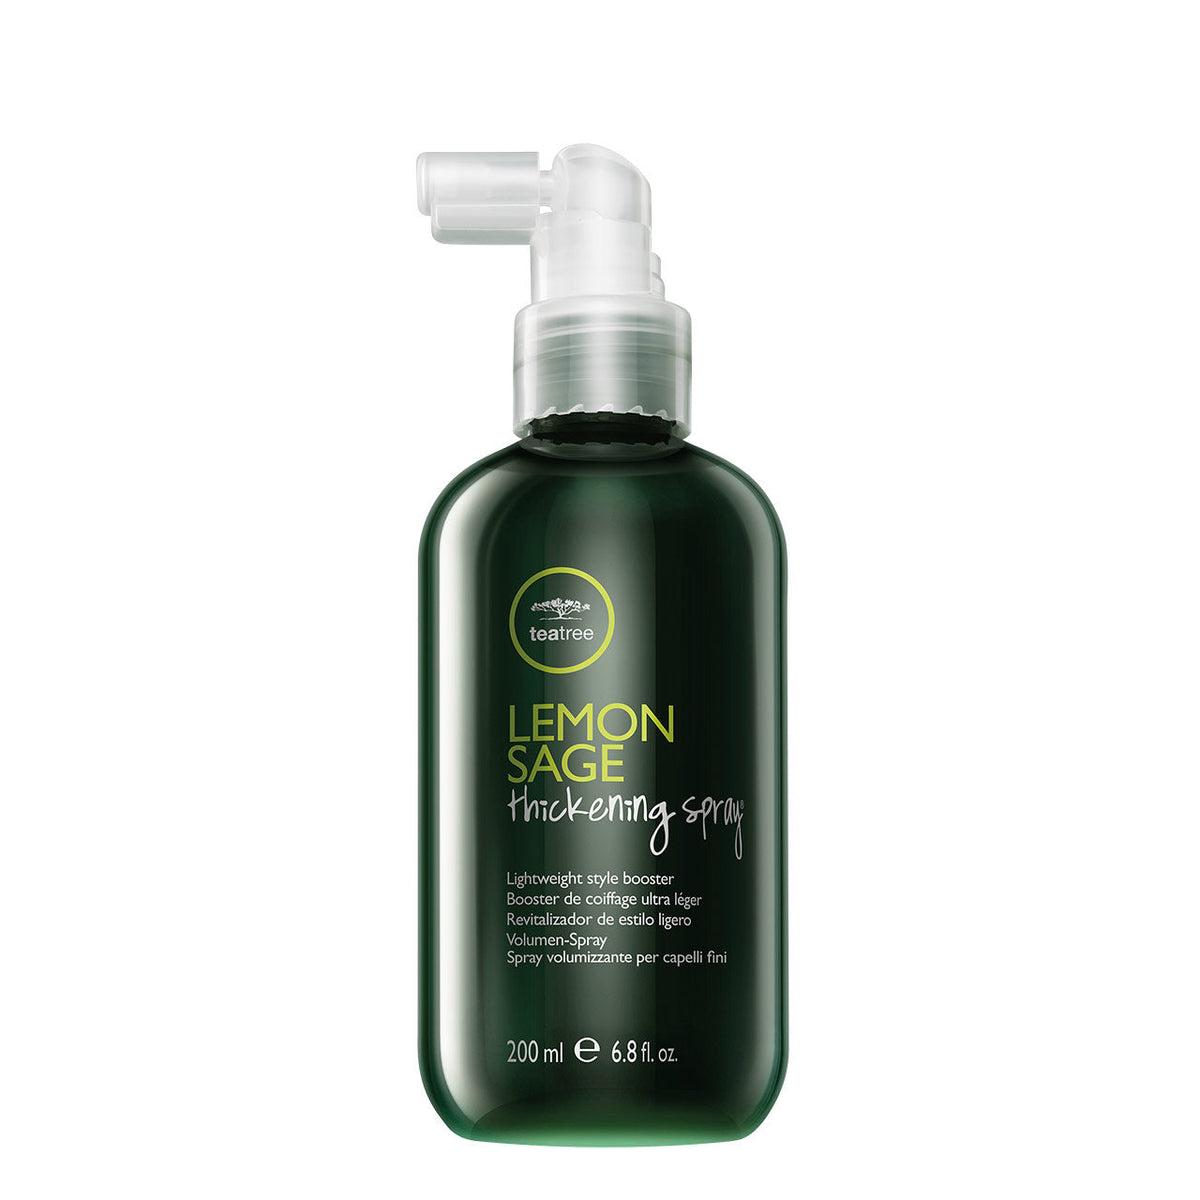 Tea Tree Lemon Sage Thickening Spray - by Paul Mitchell |ProCare Outlet|